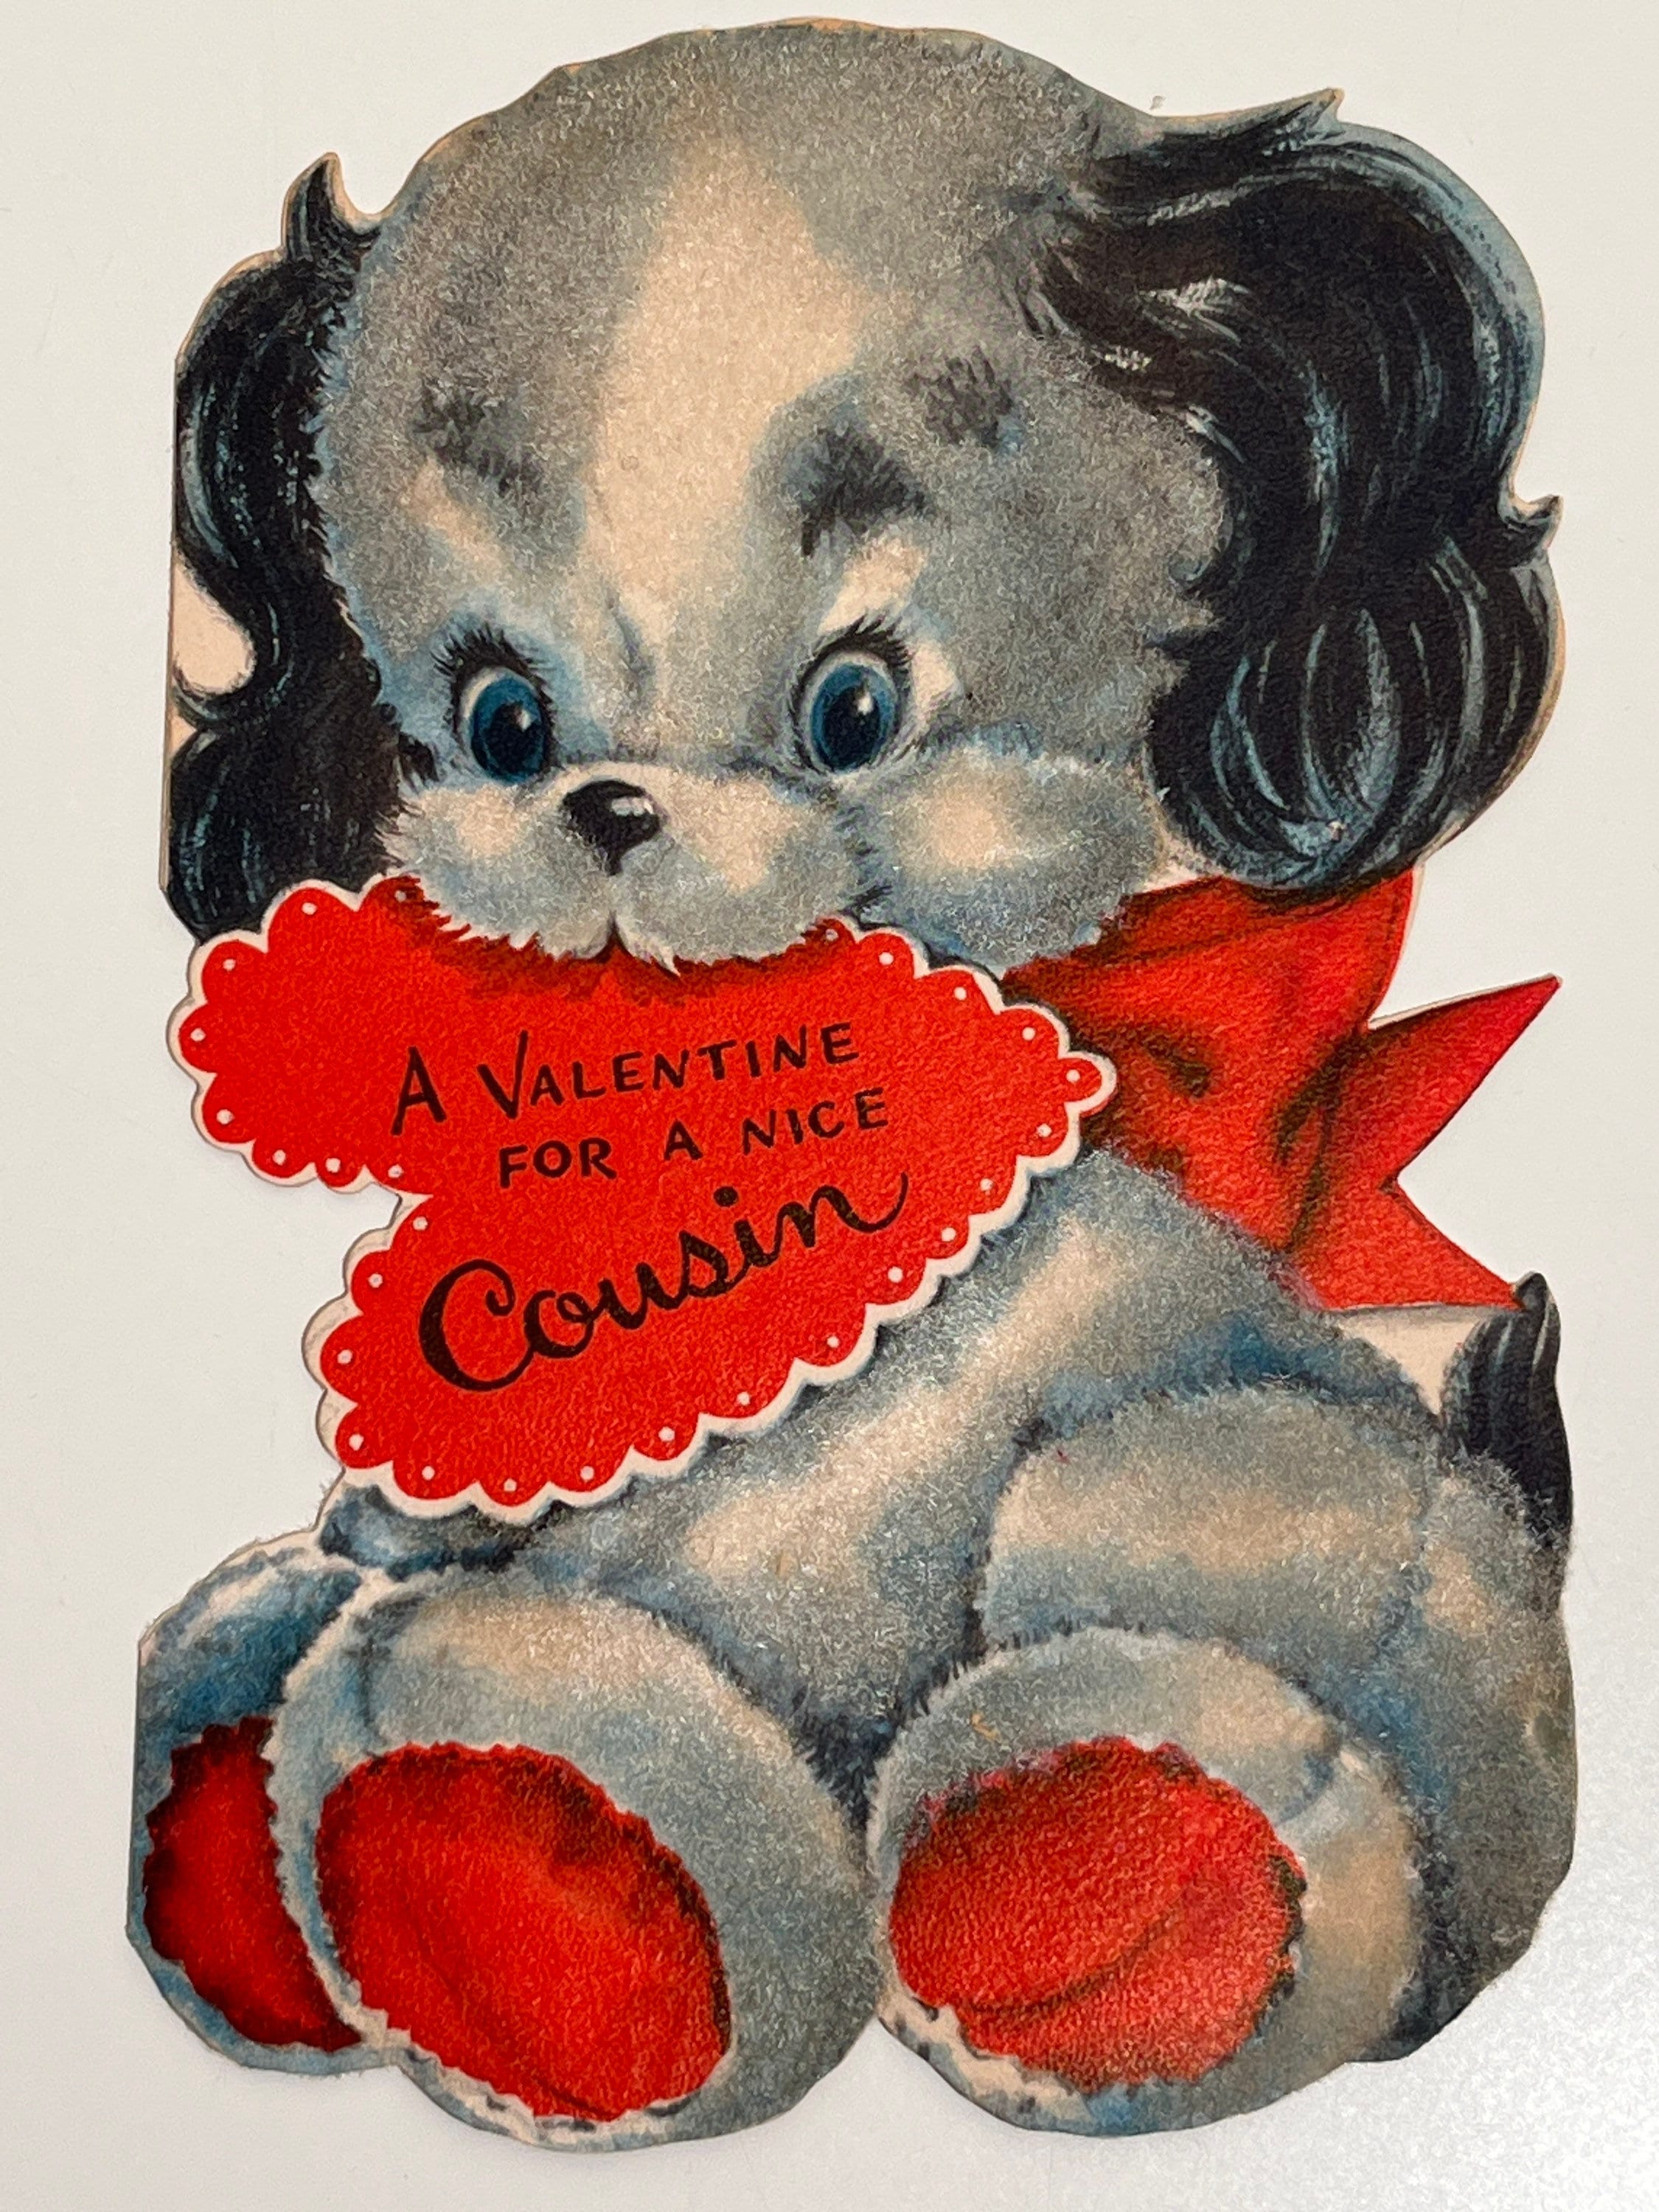 Vintage Valentines Day Card 1950s 1940s For Wife Funny Charm Craft Bald  Glasses